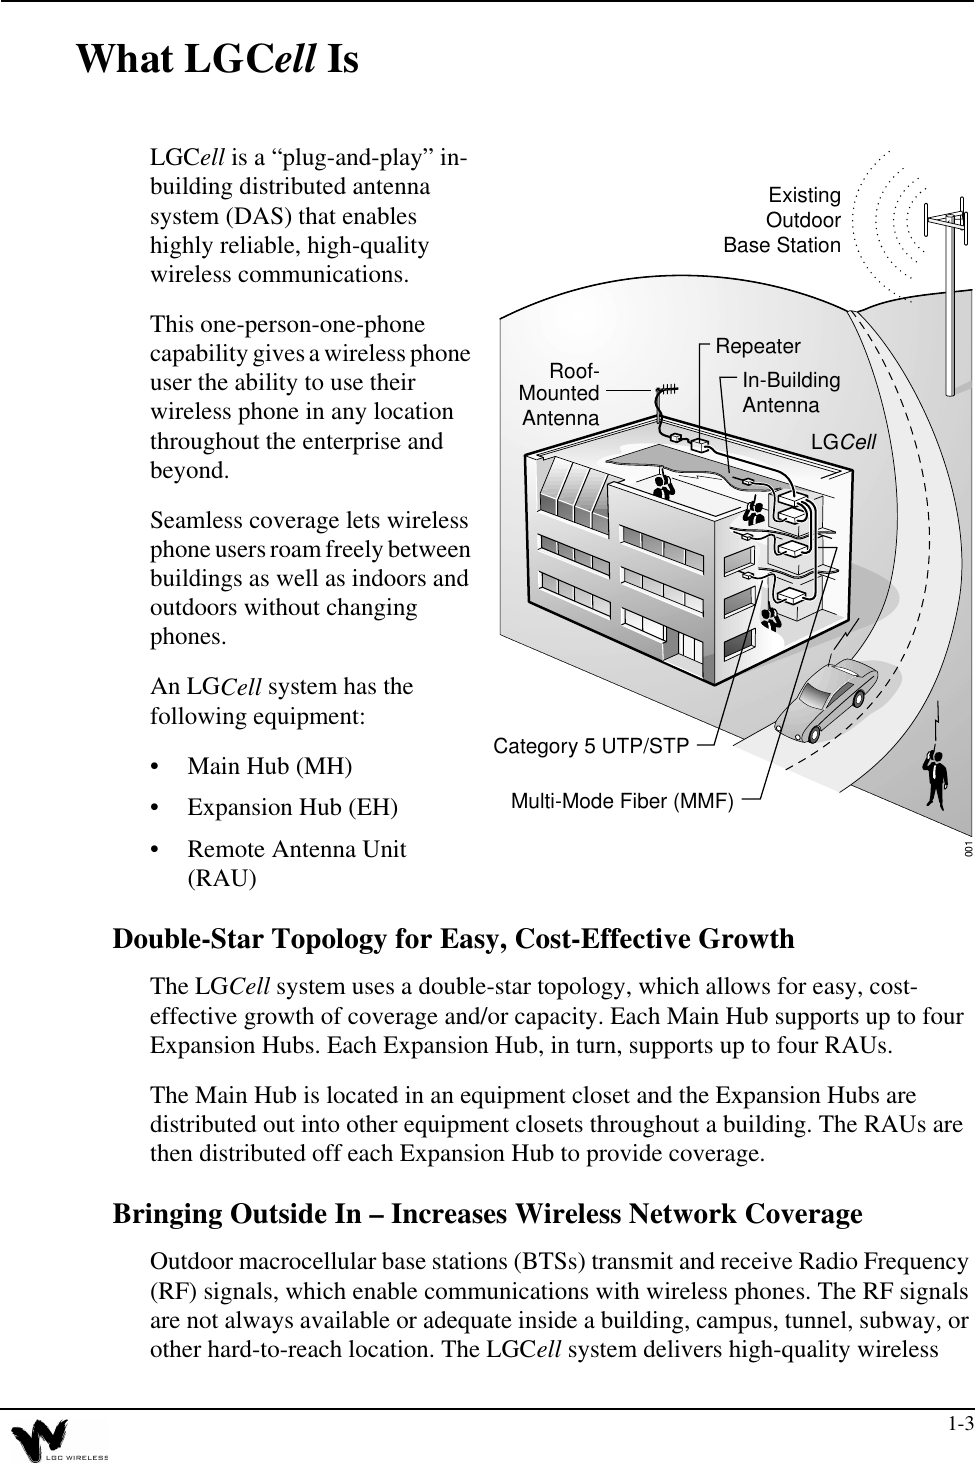 1-3What LGCell IsLGCell is a “plug-and-play” in-building distributed antenna system (DAS) that enables highly reliable, high-quality wireless communications.This one-person-one-phone capability gives a wireless phone user the ability to use their wireless phone in any location throughout the enterprise and beyond.Seamless coverage lets wireless phone users roam freely between buildings as well as indoors and outdoors without changing phones.An LGCell system has the following equipment:•Main Hub (MH)•Expansion Hub (EH)•Remote Antenna Unit (RAU)Double-Star Topology for Easy, Cost-Effective GrowthThe LGCell system uses a double-star topology, which allows for easy, cost-effective growth of coverage and/or capacity. Each Main Hub supports up to four Expansion Hubs. Each Expansion Hub, in turn, supports up to four RAUs.The Main Hub is located in an equipment closet and the Expansion Hubs are distributed out into other equipment closets throughout a building. The RAUs are then distributed off each Expansion Hub to provide coverage.Bringing Outside In – Increases Wireless Network CoverageOutdoor macrocellular base stations (BTSs) transmit and receive Radio Frequency (RF) signals, which enable communications with wireless phones. The RF signals are not always available or adequate inside a building, campus, tunnel, subway, or other hard-to-reach location. The LGCell system delivers high-quality wireless  Multi-Mode Fiber (MMF)Roof-001LGCellExistingOutdoorBase StationMountedAntennaCategory 5 UTP/STPIn-BuildingAntennaRepeater